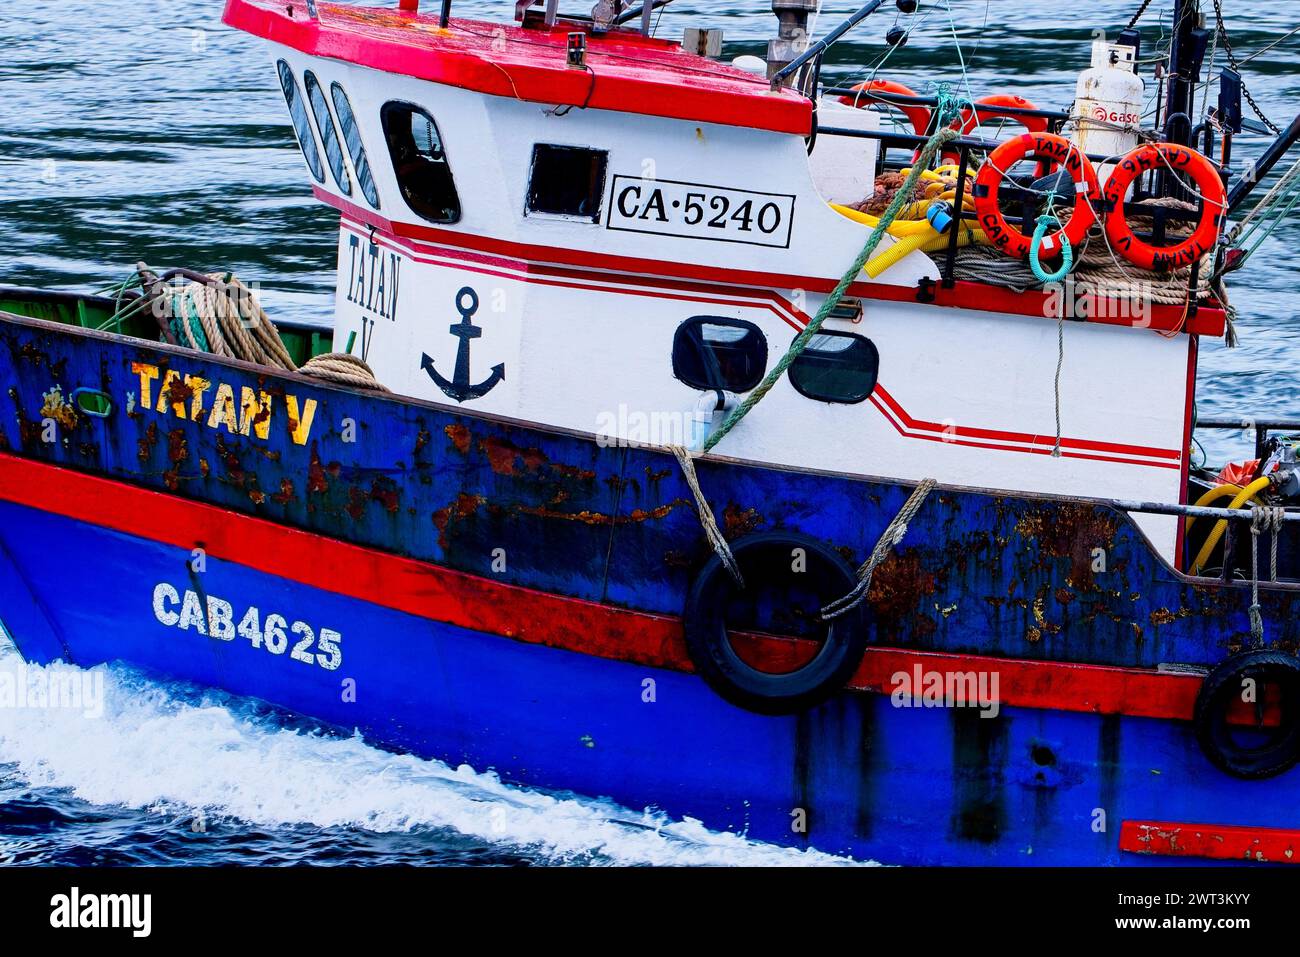 A colourfull fishing trawler along the Strait of Magellan. Strait of Magellan, is a channel linking the Atlantic and Pacific oceans. Stock Photo